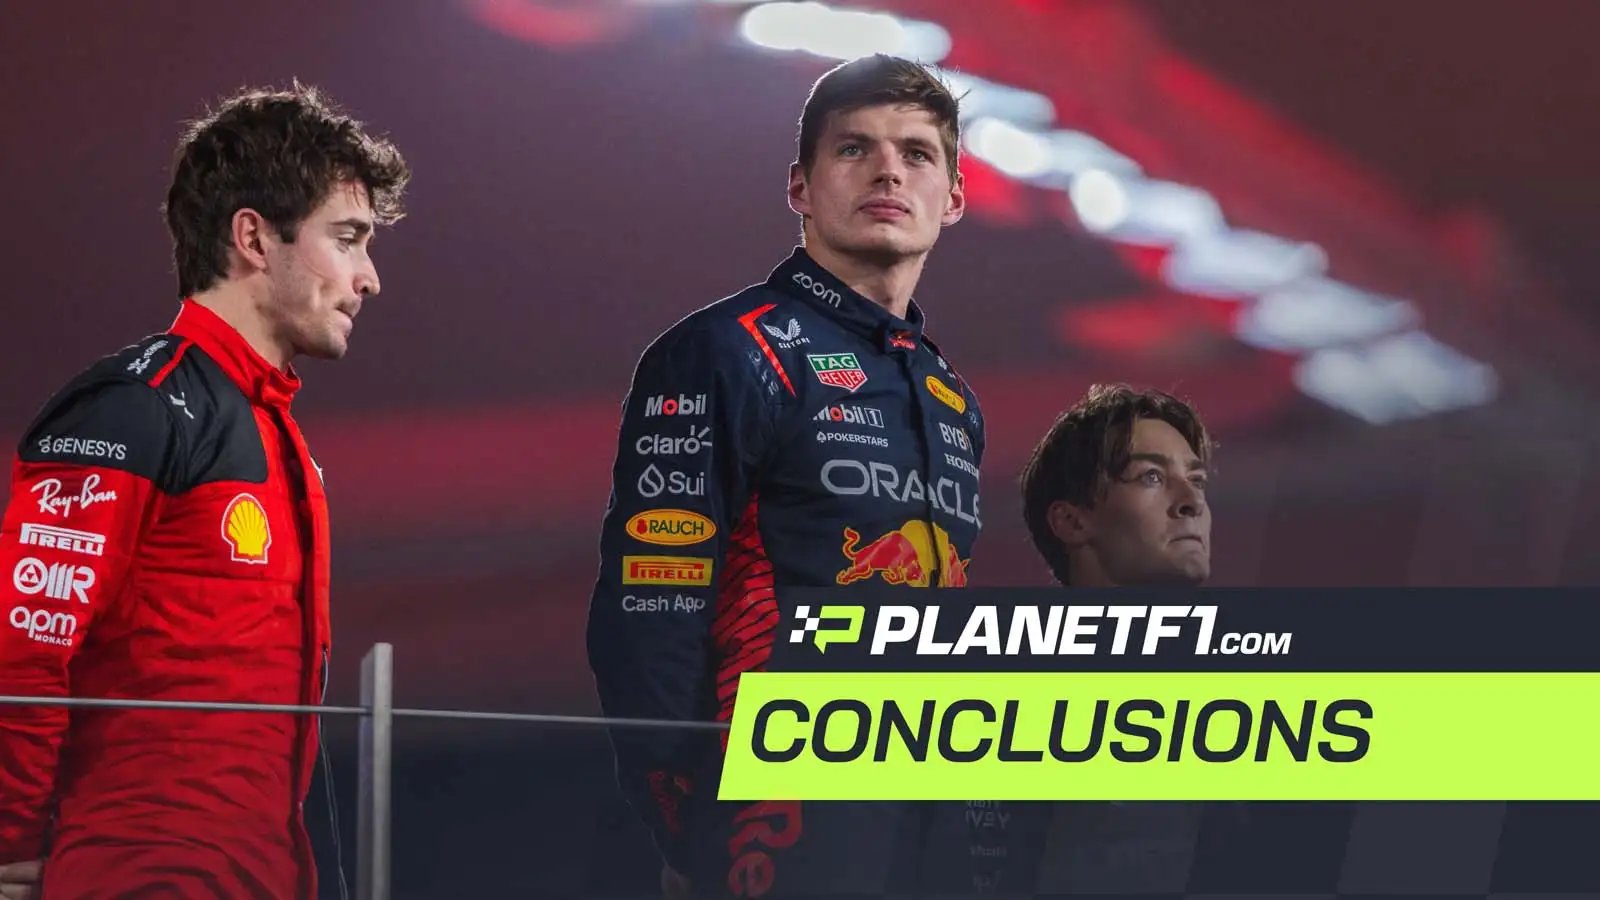 Max Verstappen stands head and shoulders above the competition on the Formula 1 podium.